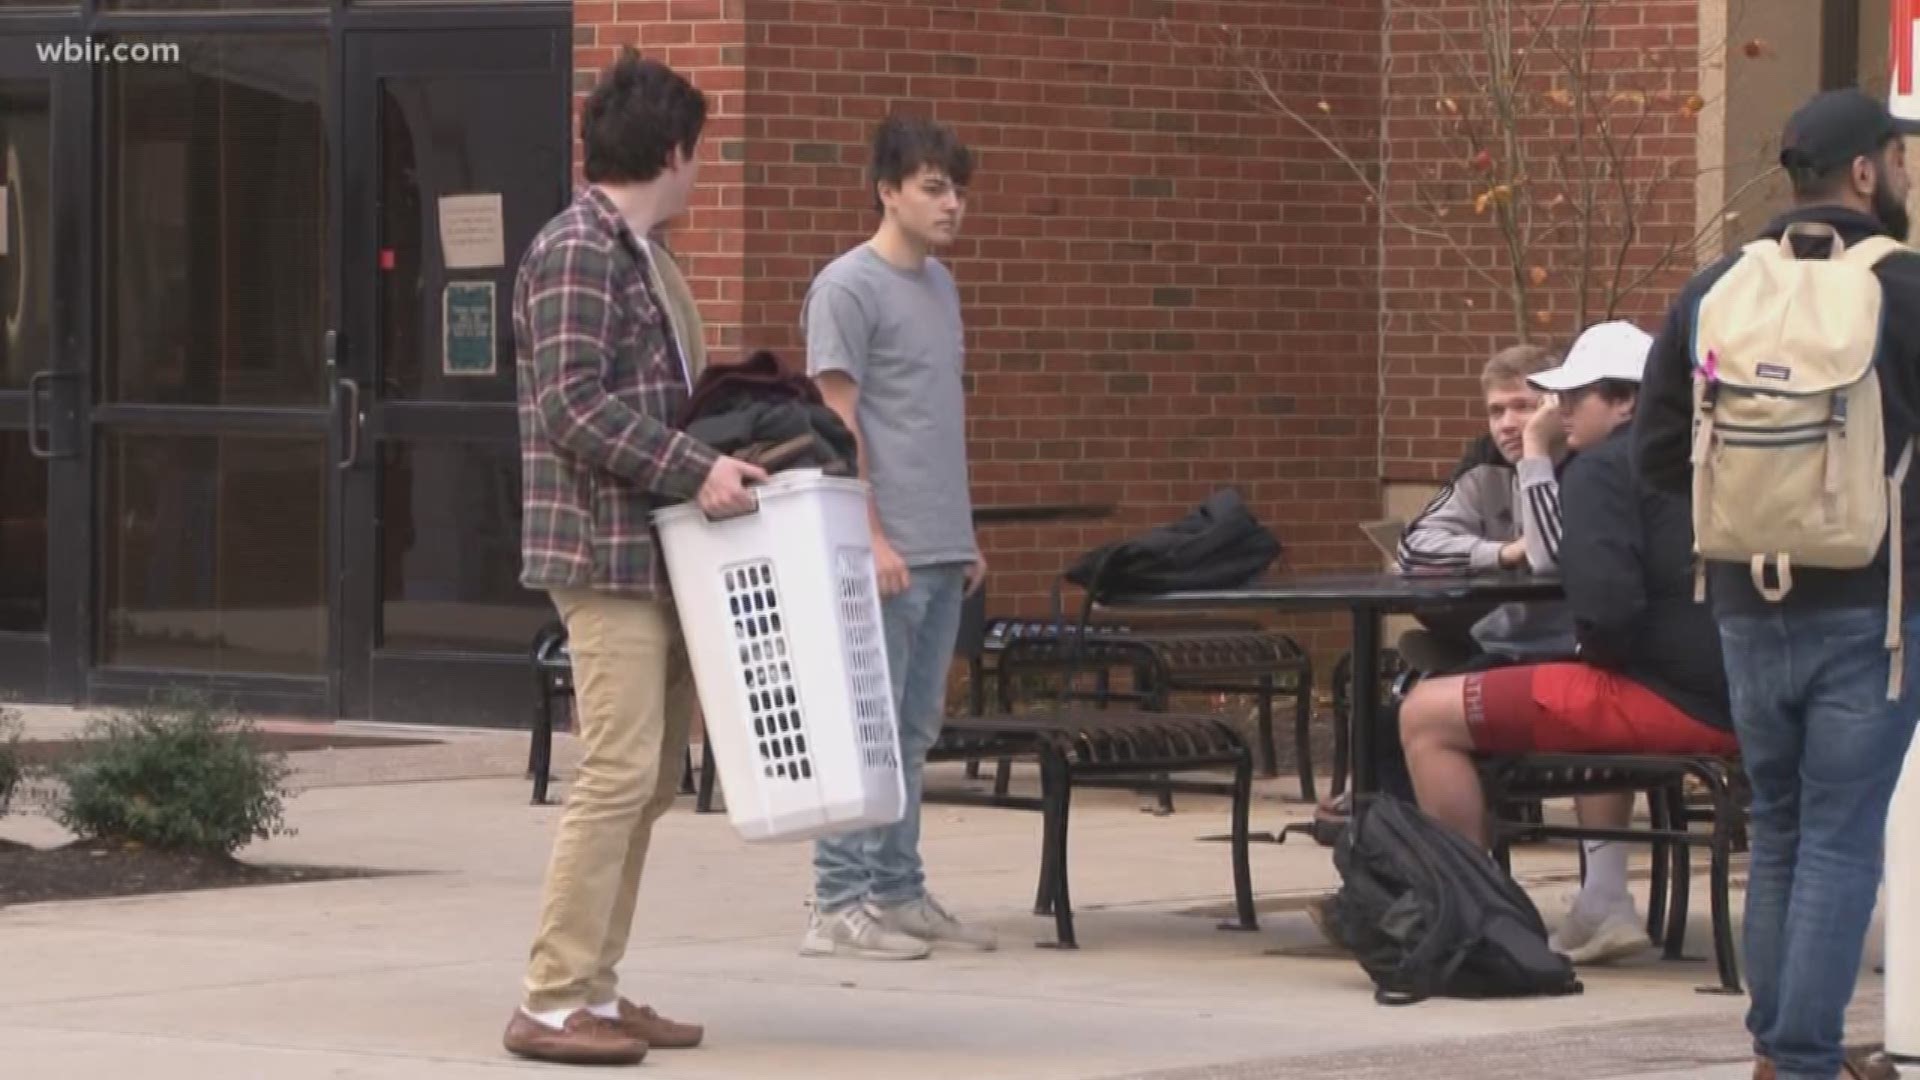 Nearly 400 students are out of their dorms just before finals